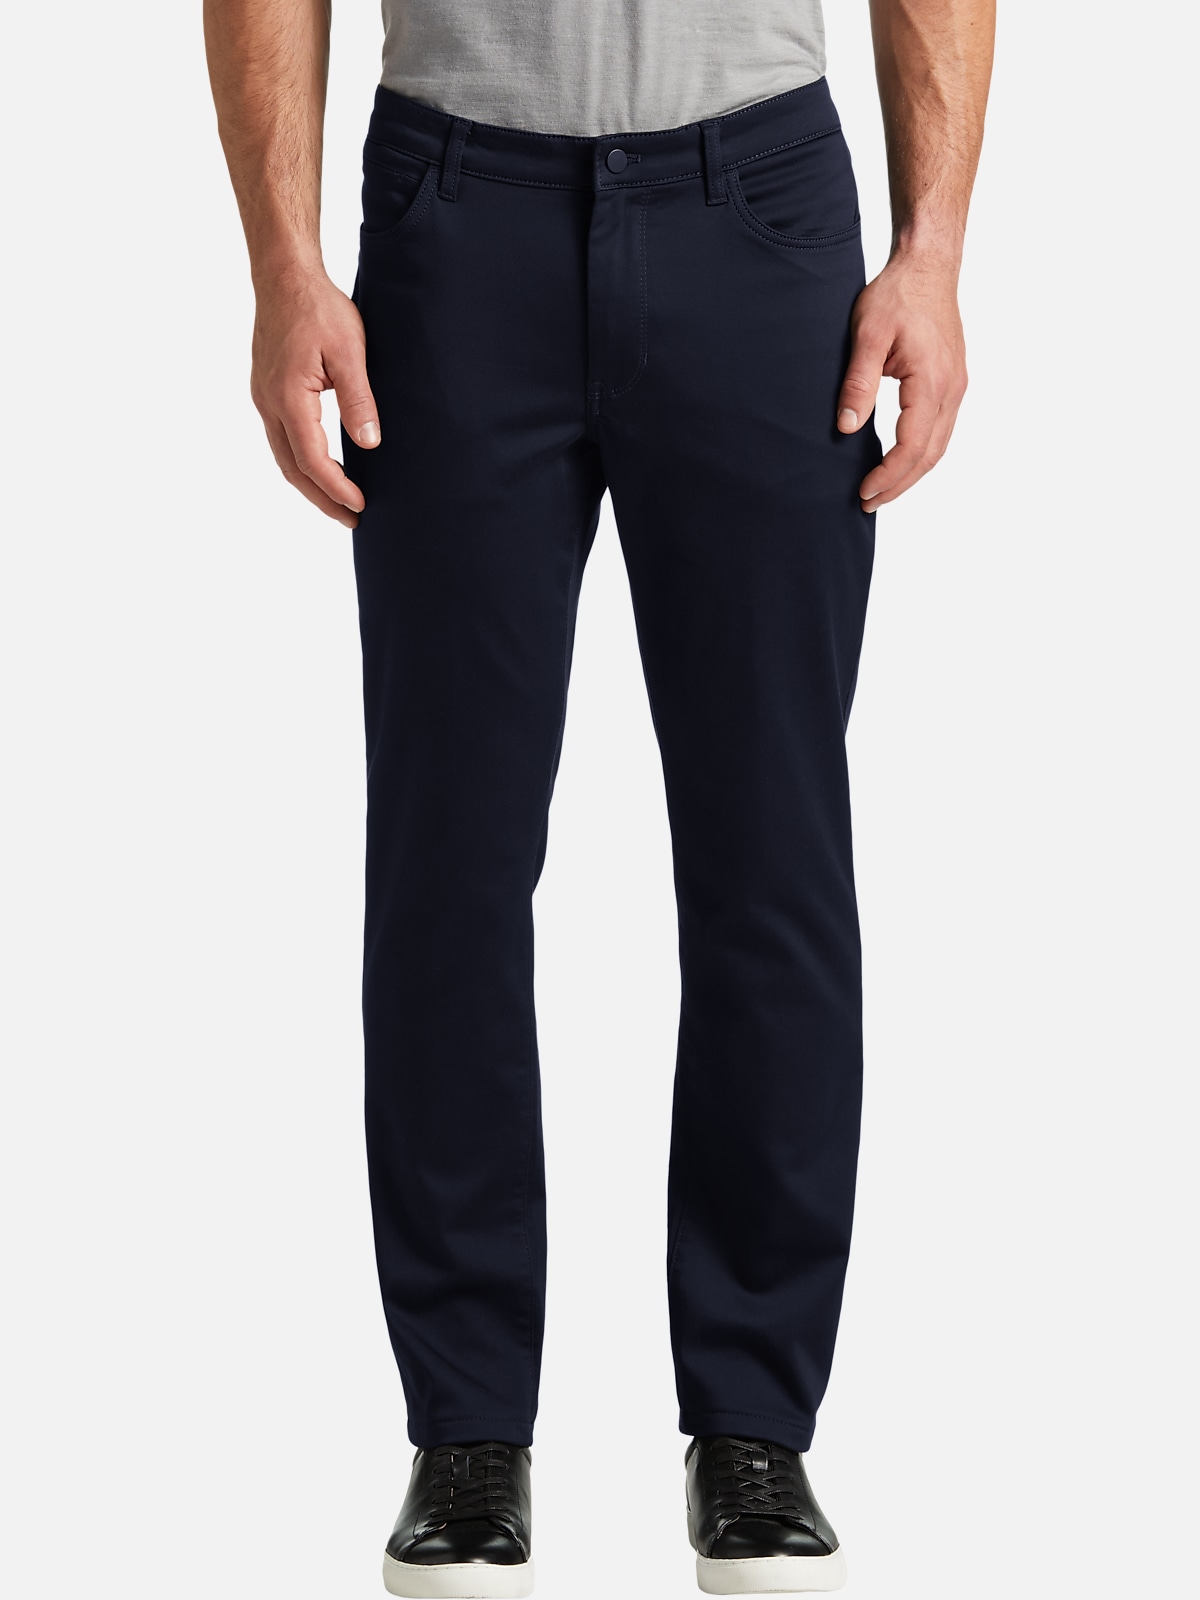 Awearness Kenneth Cole Modern Fit Stretch Waist Pants | All Sale| Men's ...